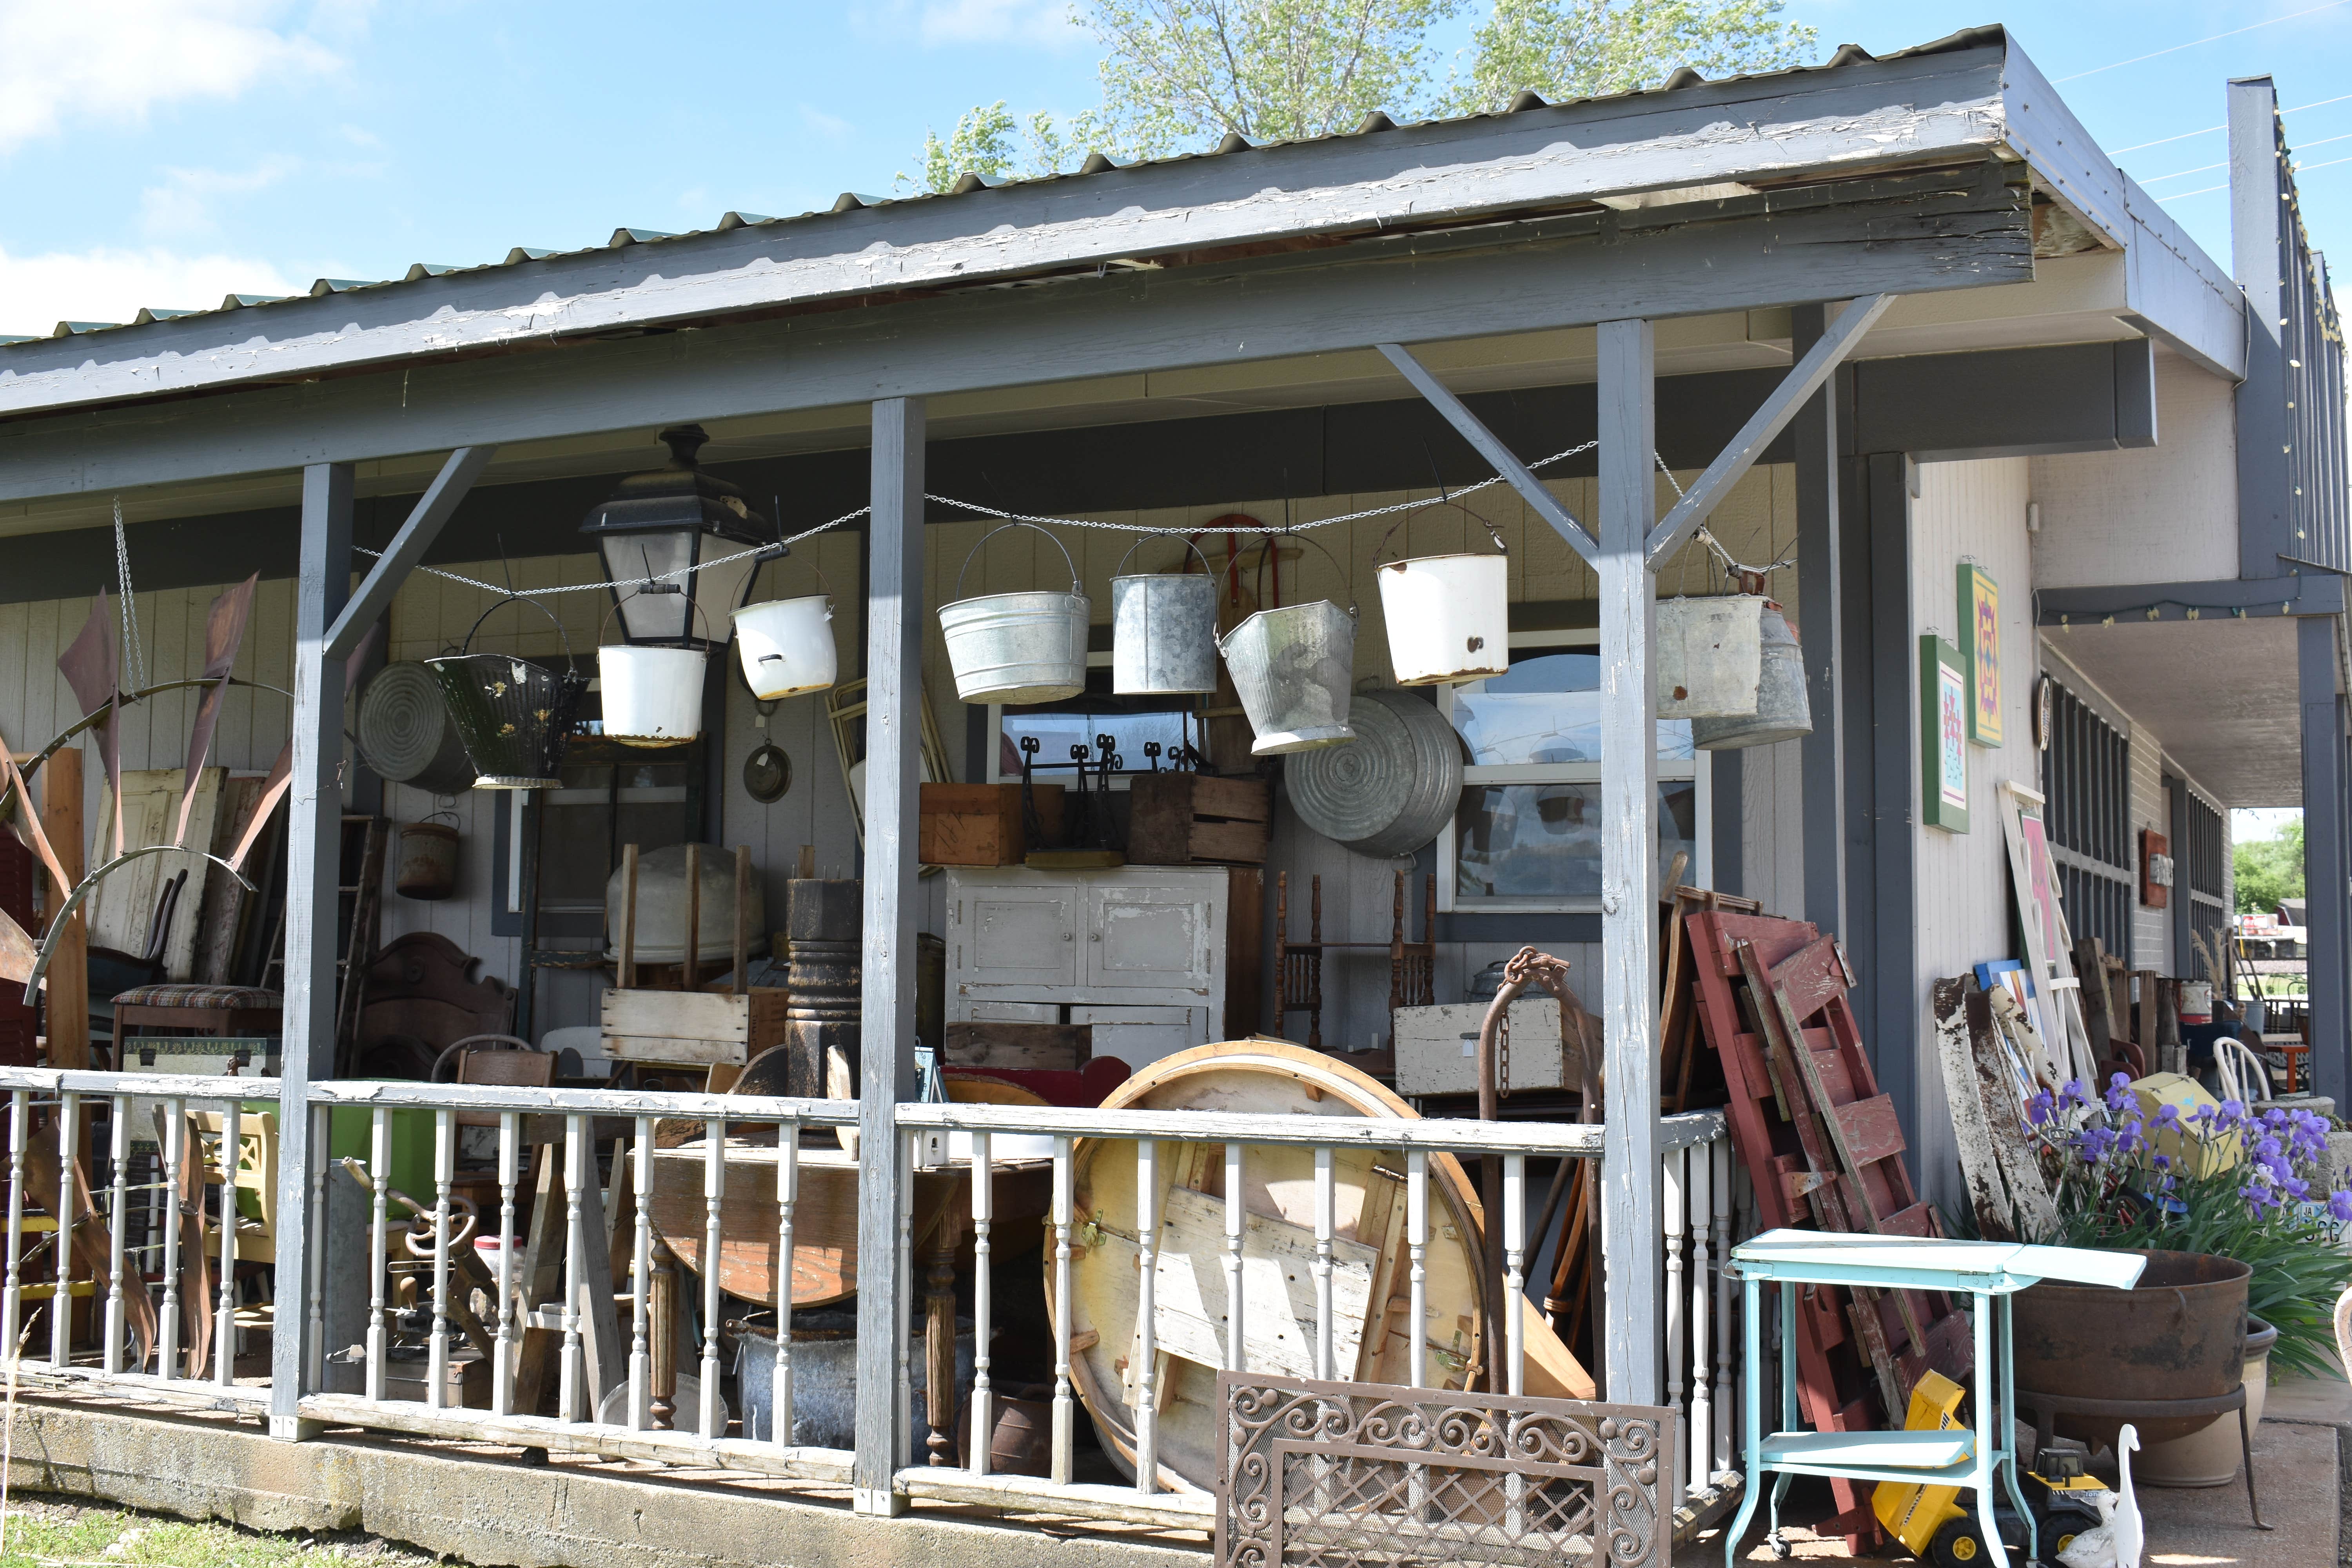 There are a lot of places to buy antiques in Paxico.